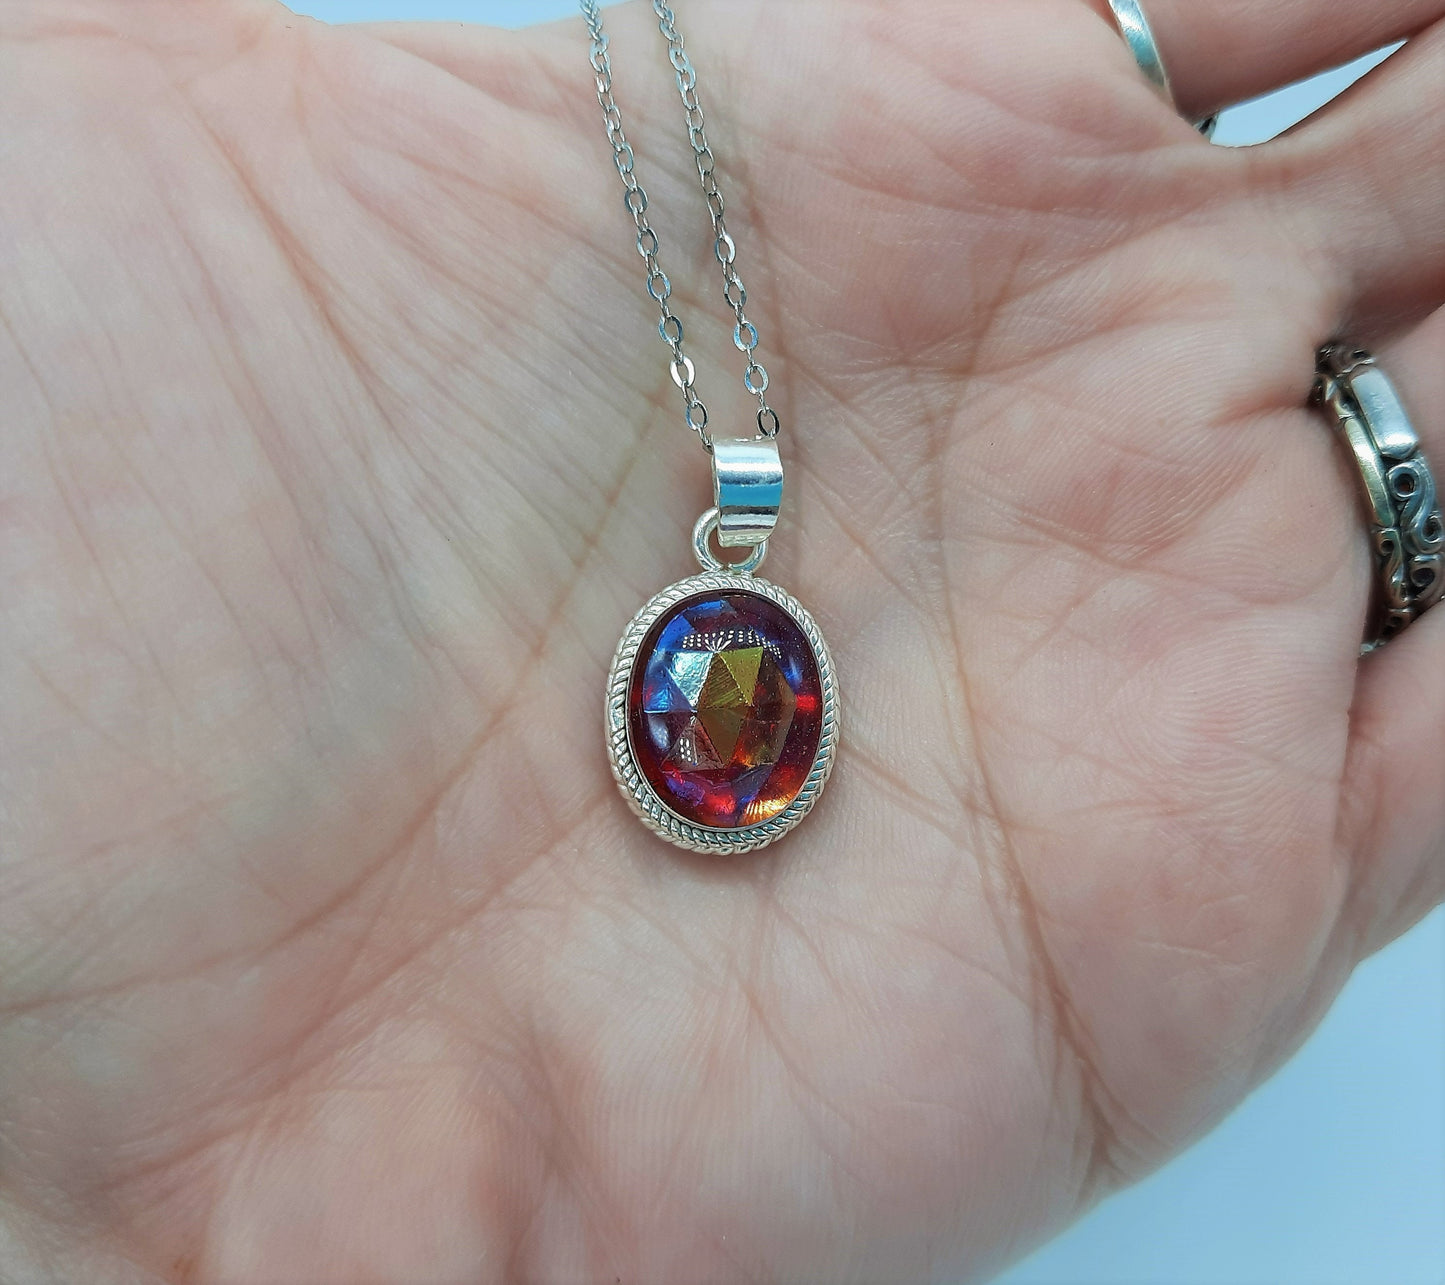 Handcrafted Multifaceted Vintage Ruby Red Aurora Borealis Glass Cabochon Pendant Necklace, Domed w/ Mica Infused Resin, 925 Sterling Silver